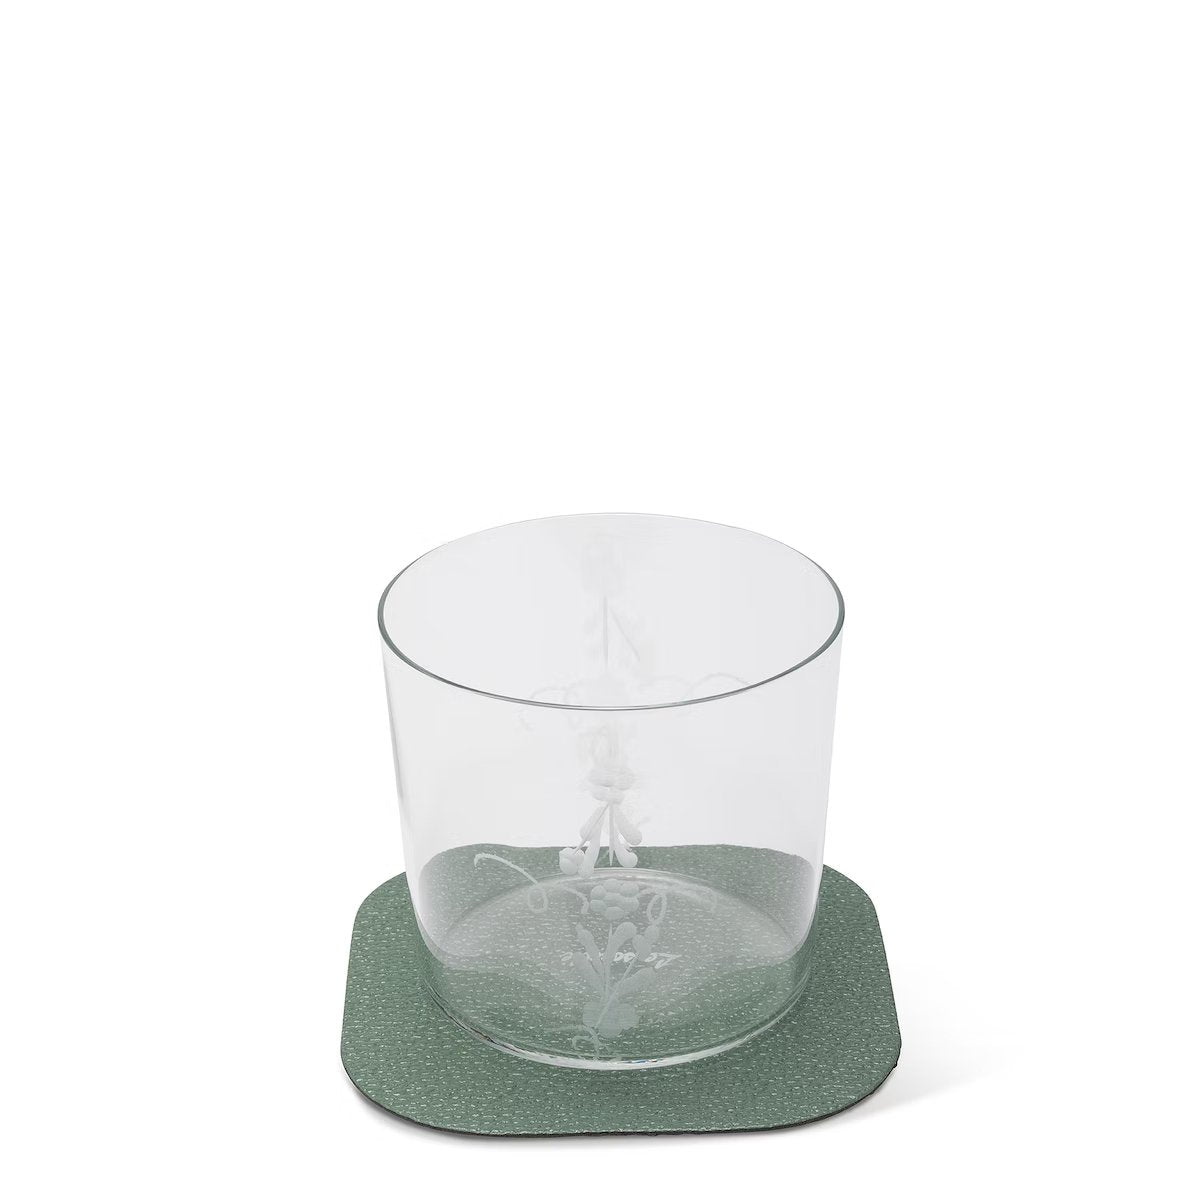 A textured washable paper coaster is shown in green under a water glass.